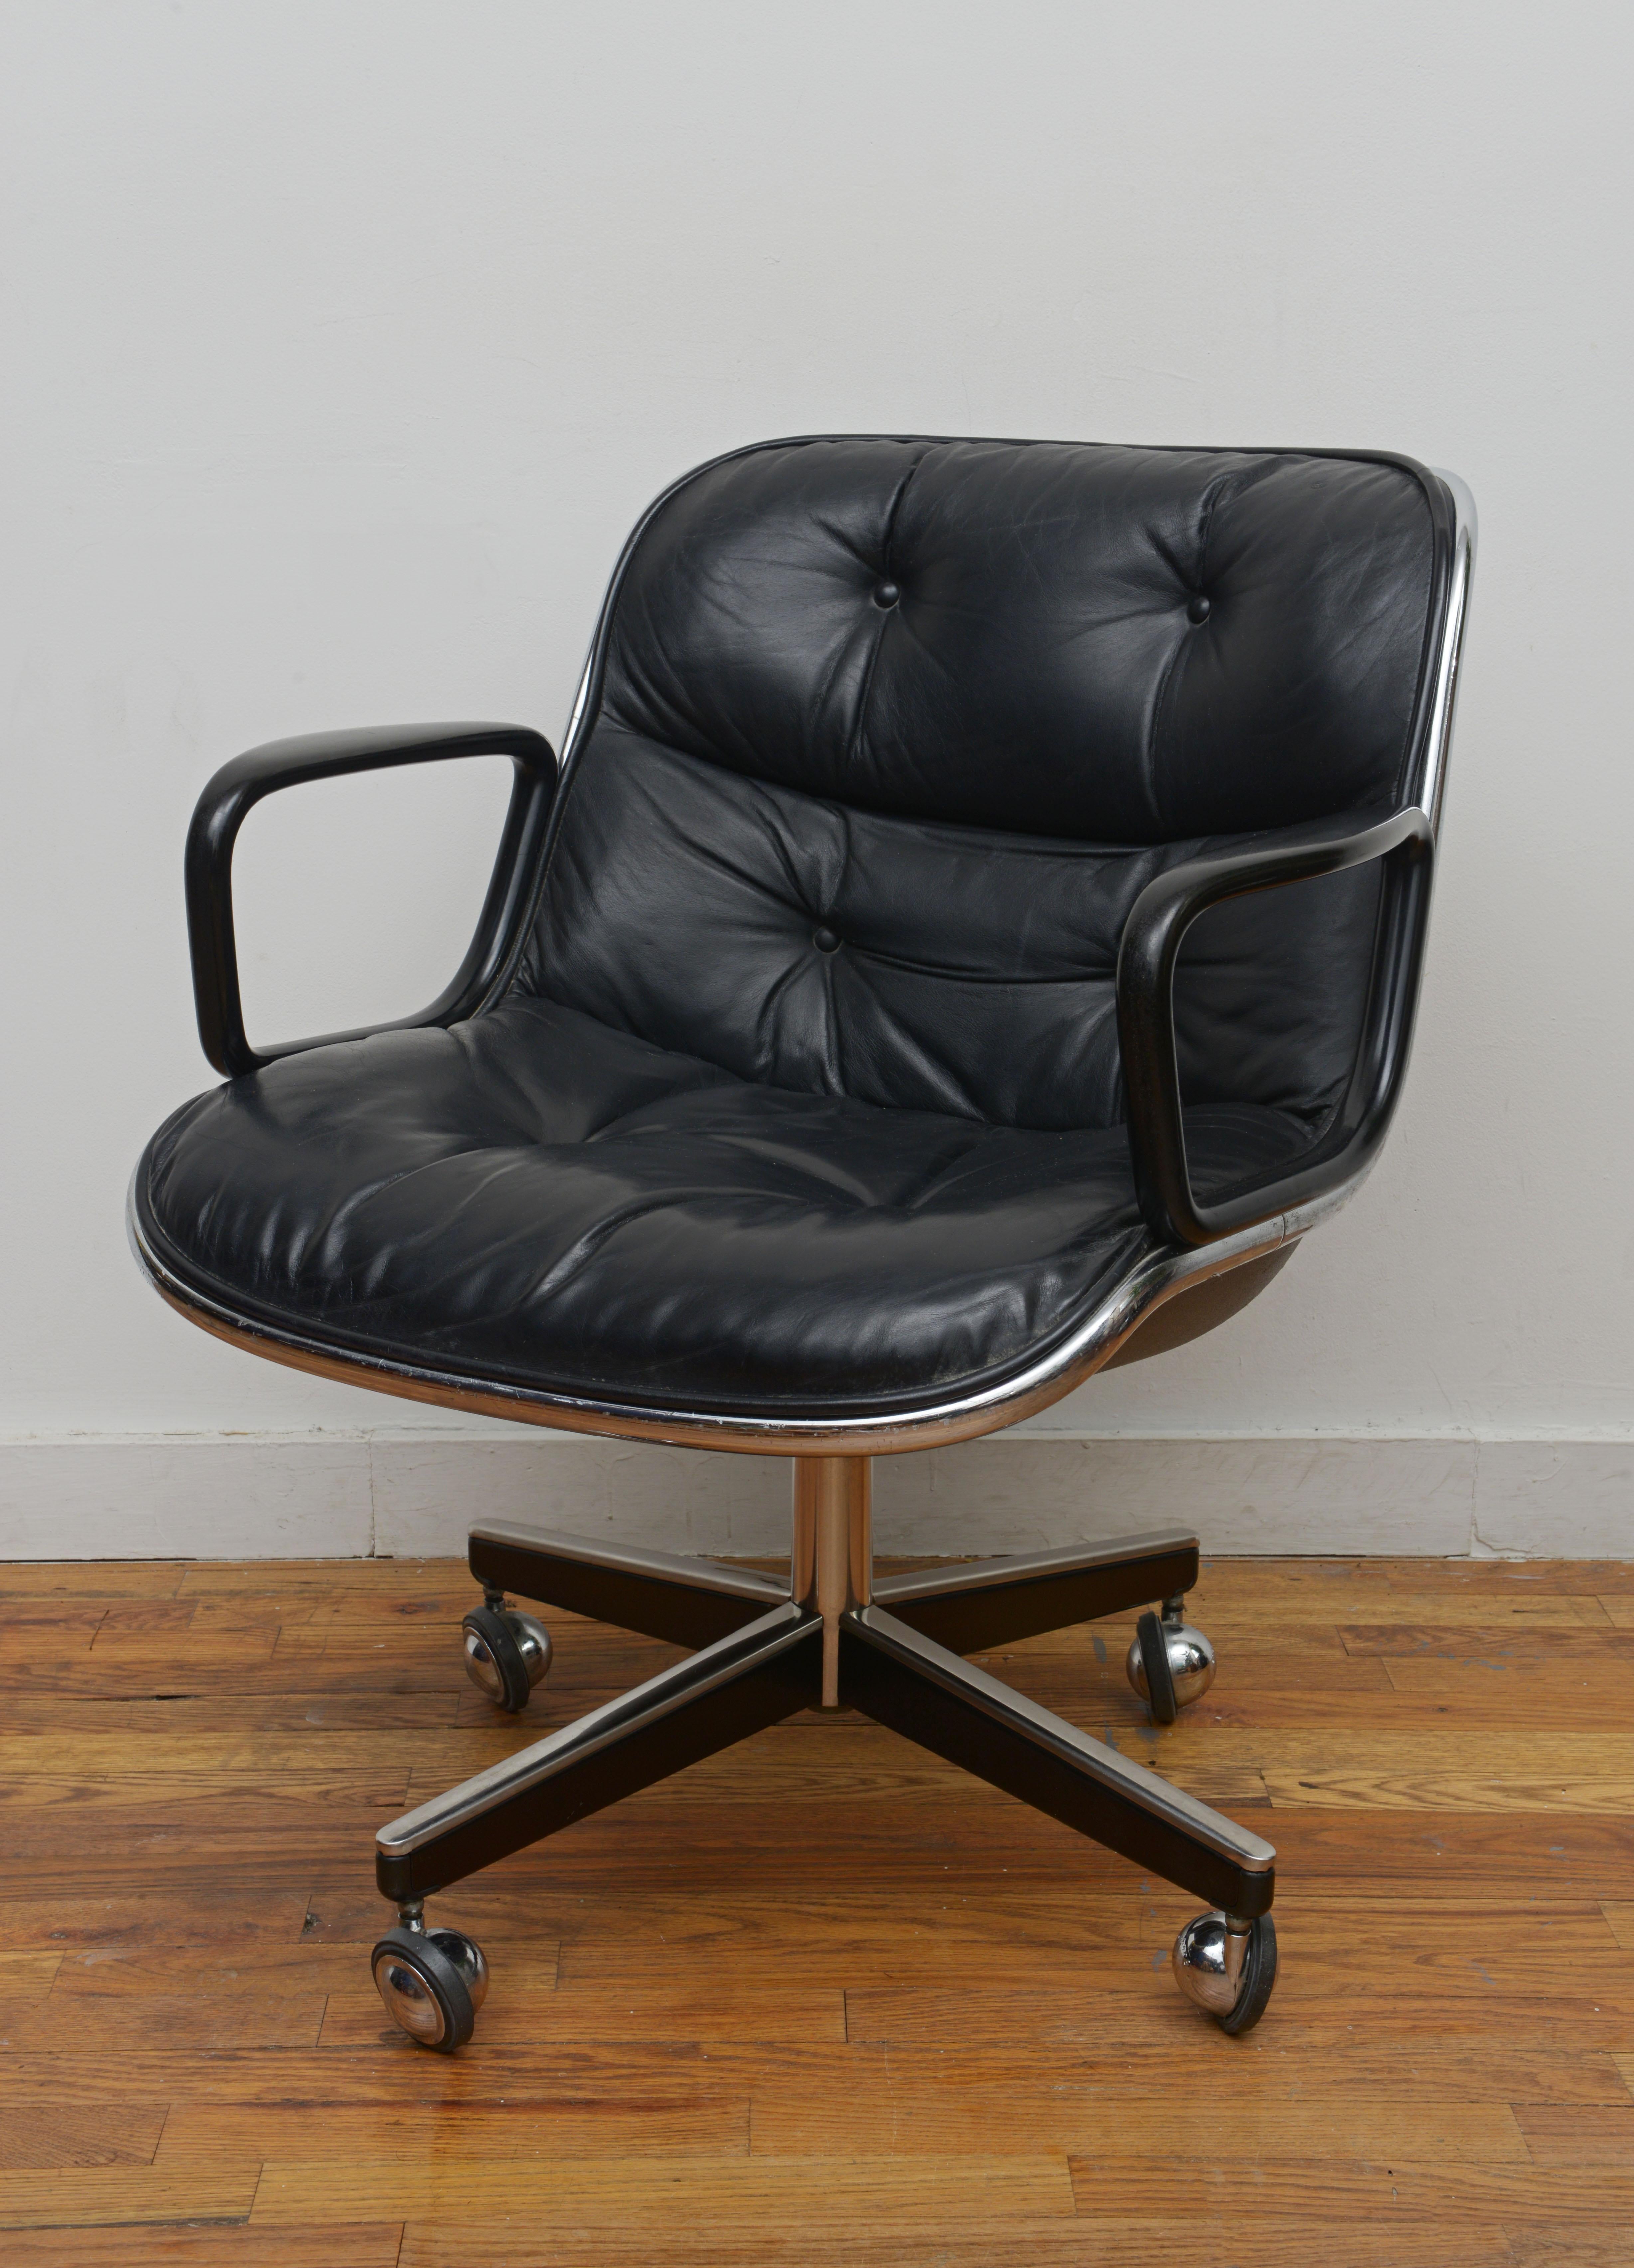 Let’s talk about a classic office chair. This Charles Pollock Executive chair for Knoll in black leather is an iconic 70s design and perfect for any work space. The big vintage ball casters help this chair roll easily even on thicker surfaces like